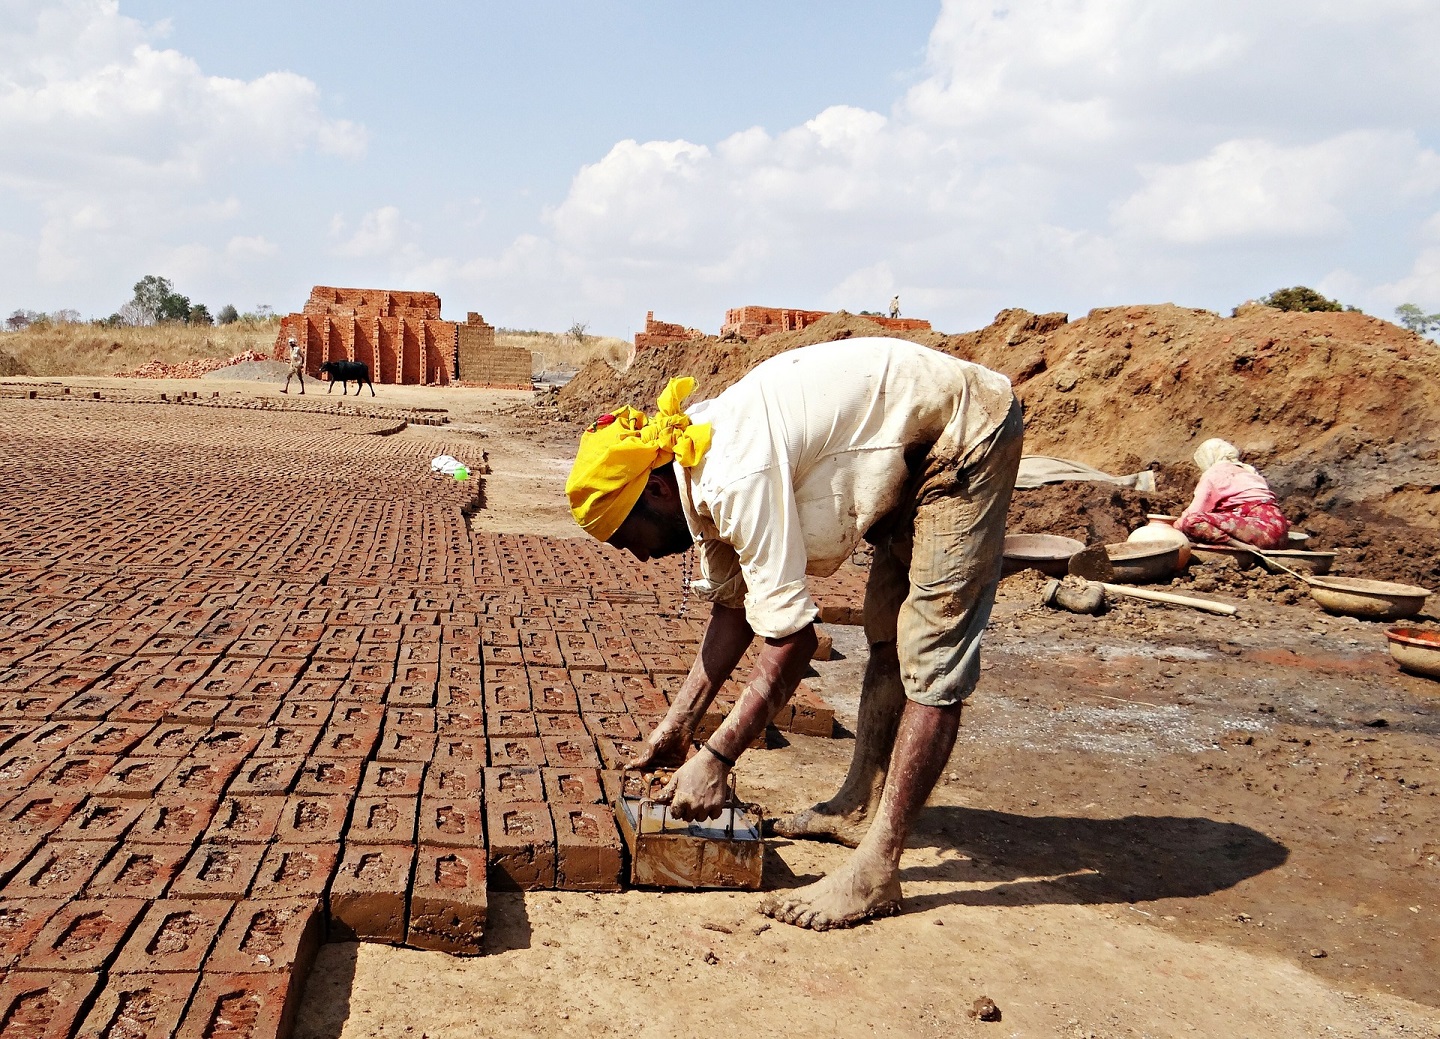 Innovation is one of the key drivers for the brick industry in Bangladesh